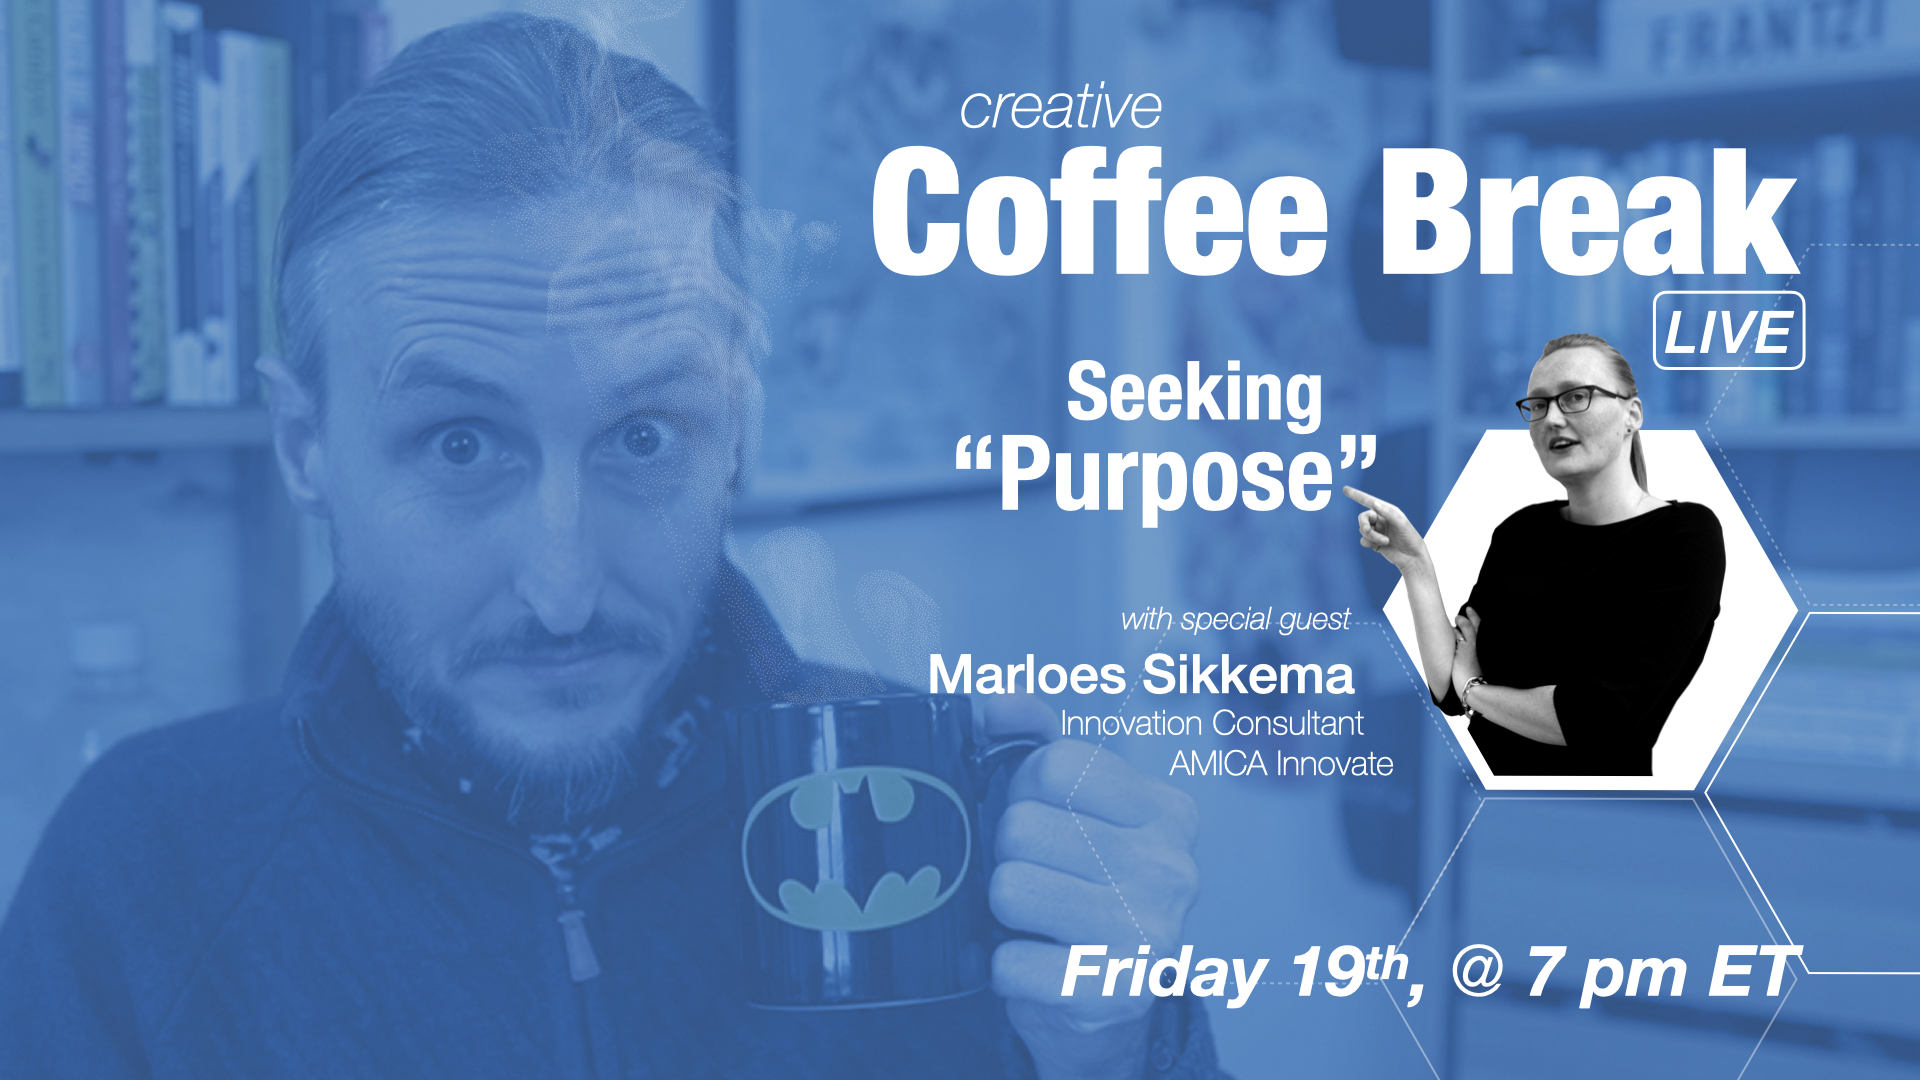 Seeking purpose, over coffee – a live working session